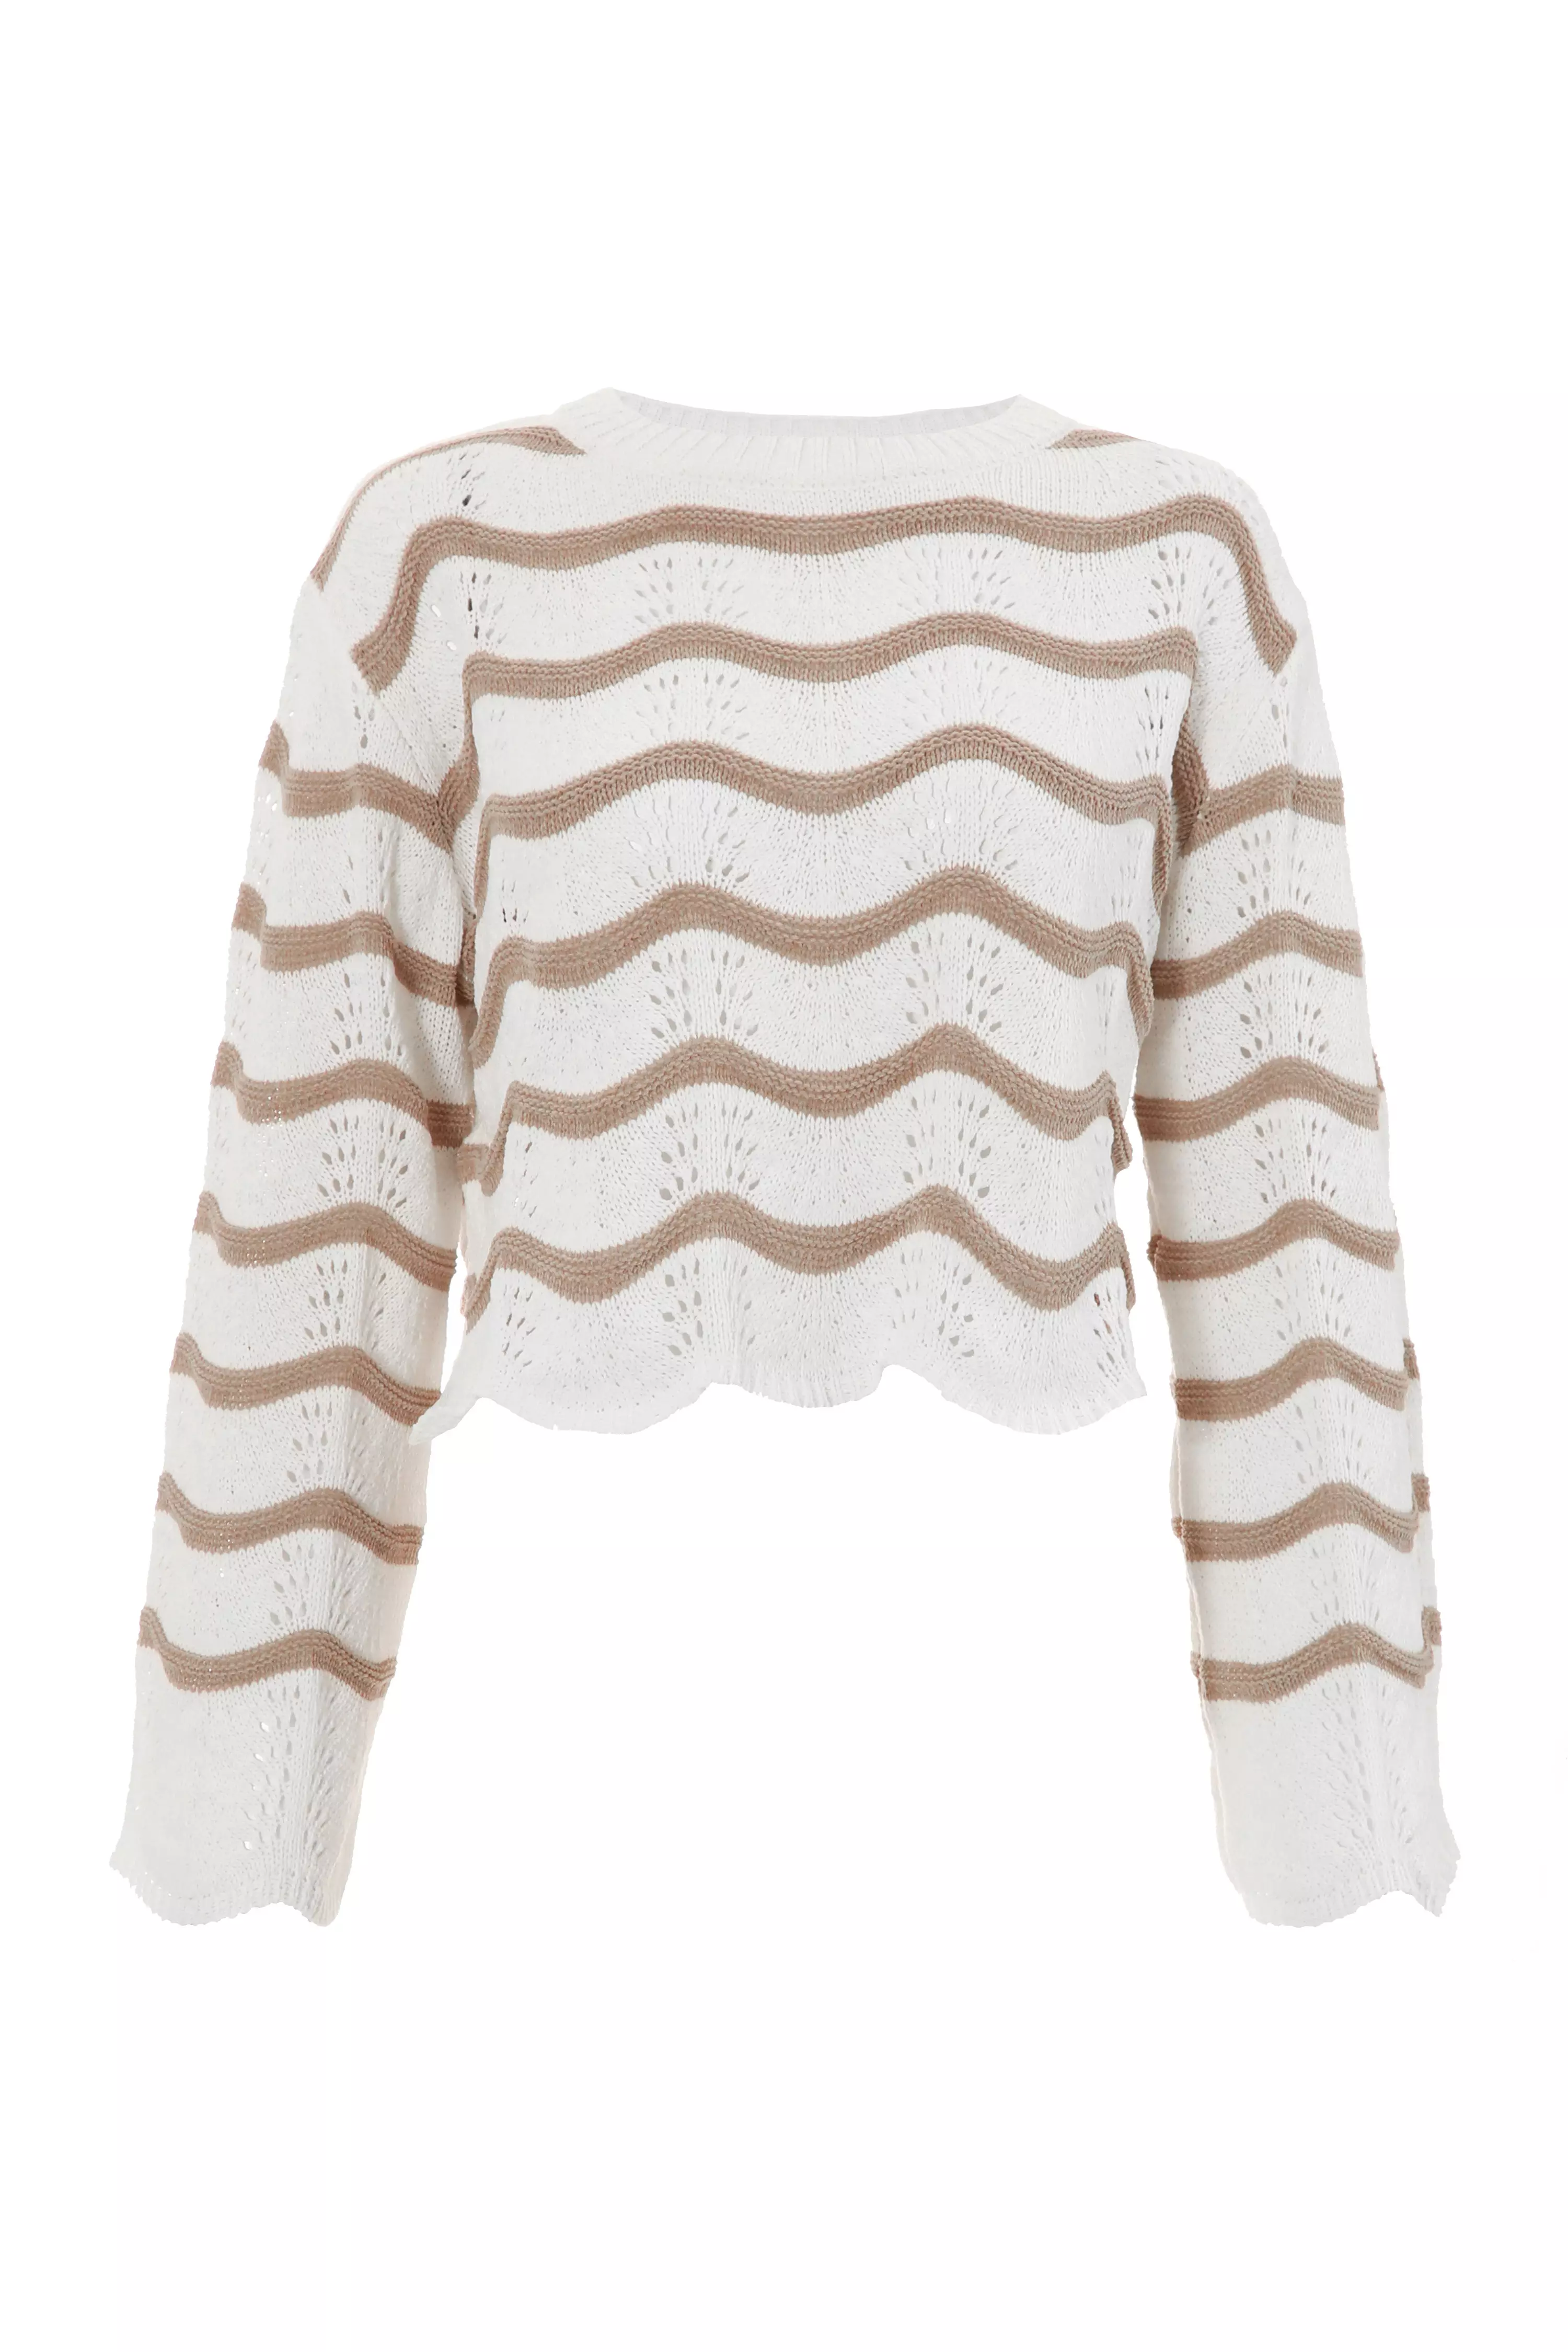 Cream Wavy Print Knitted Cropped Jumper